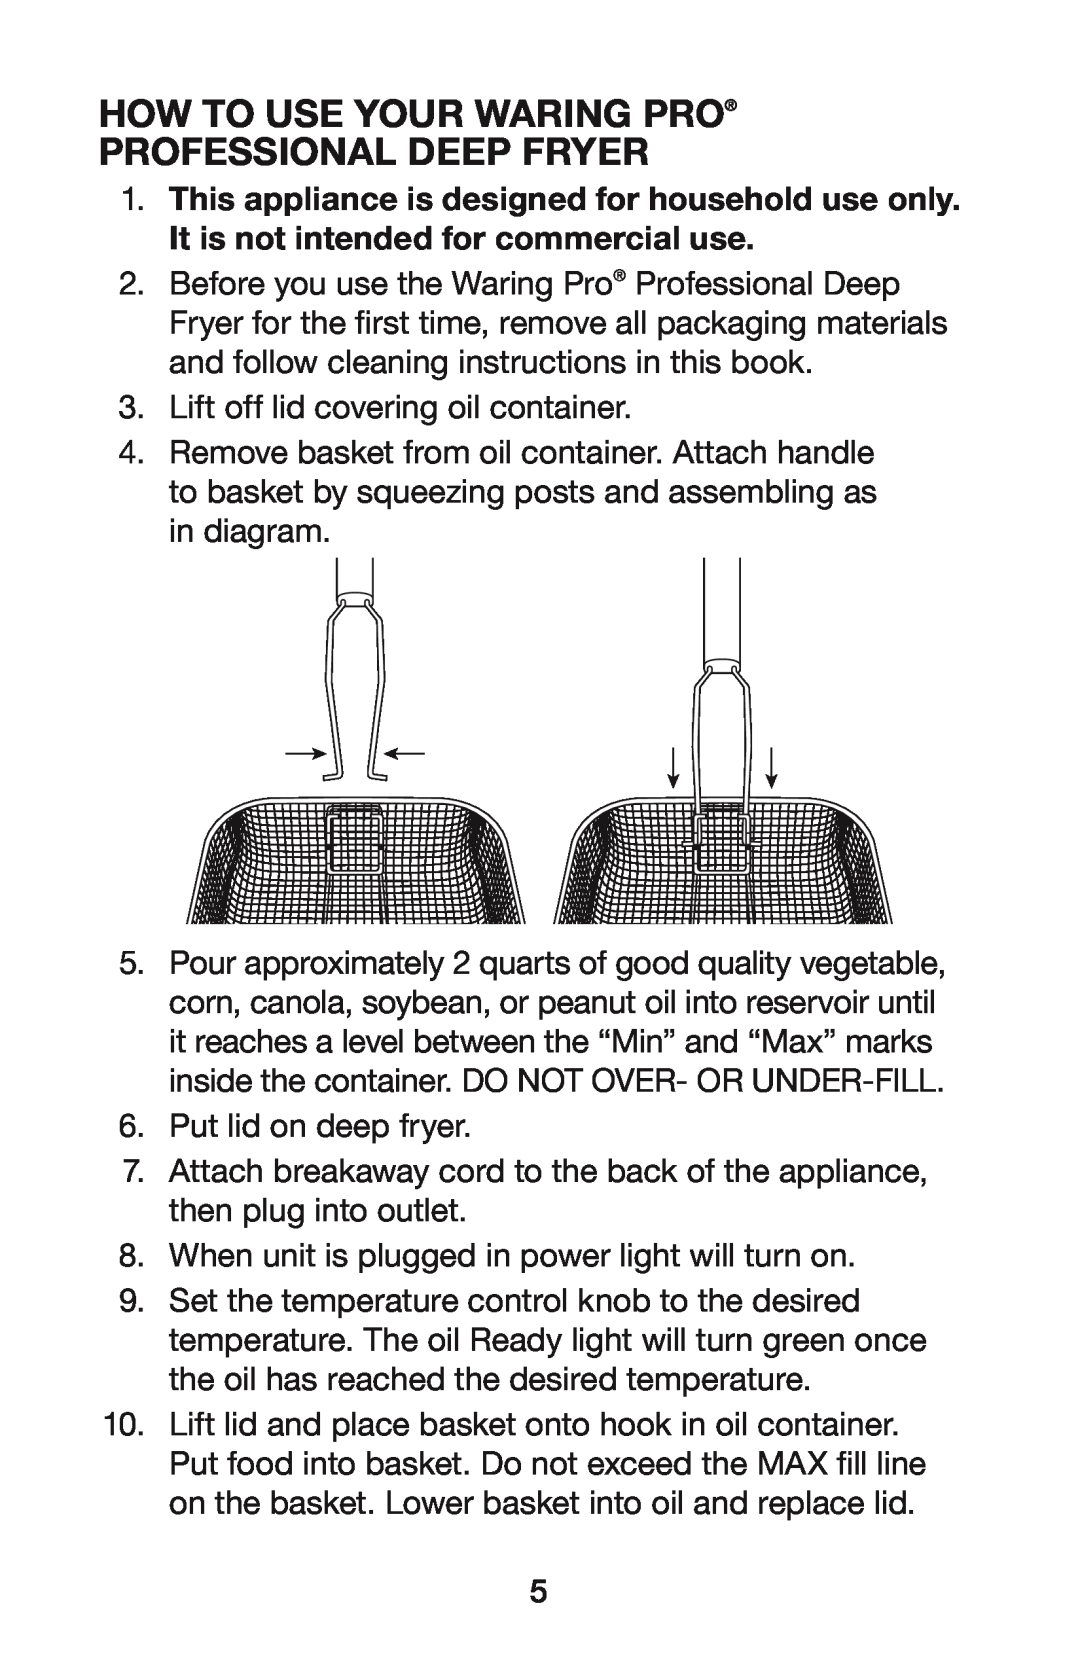 Waring DF55 manual How To Use Your Waring Pro, Professional Deep Fryer 